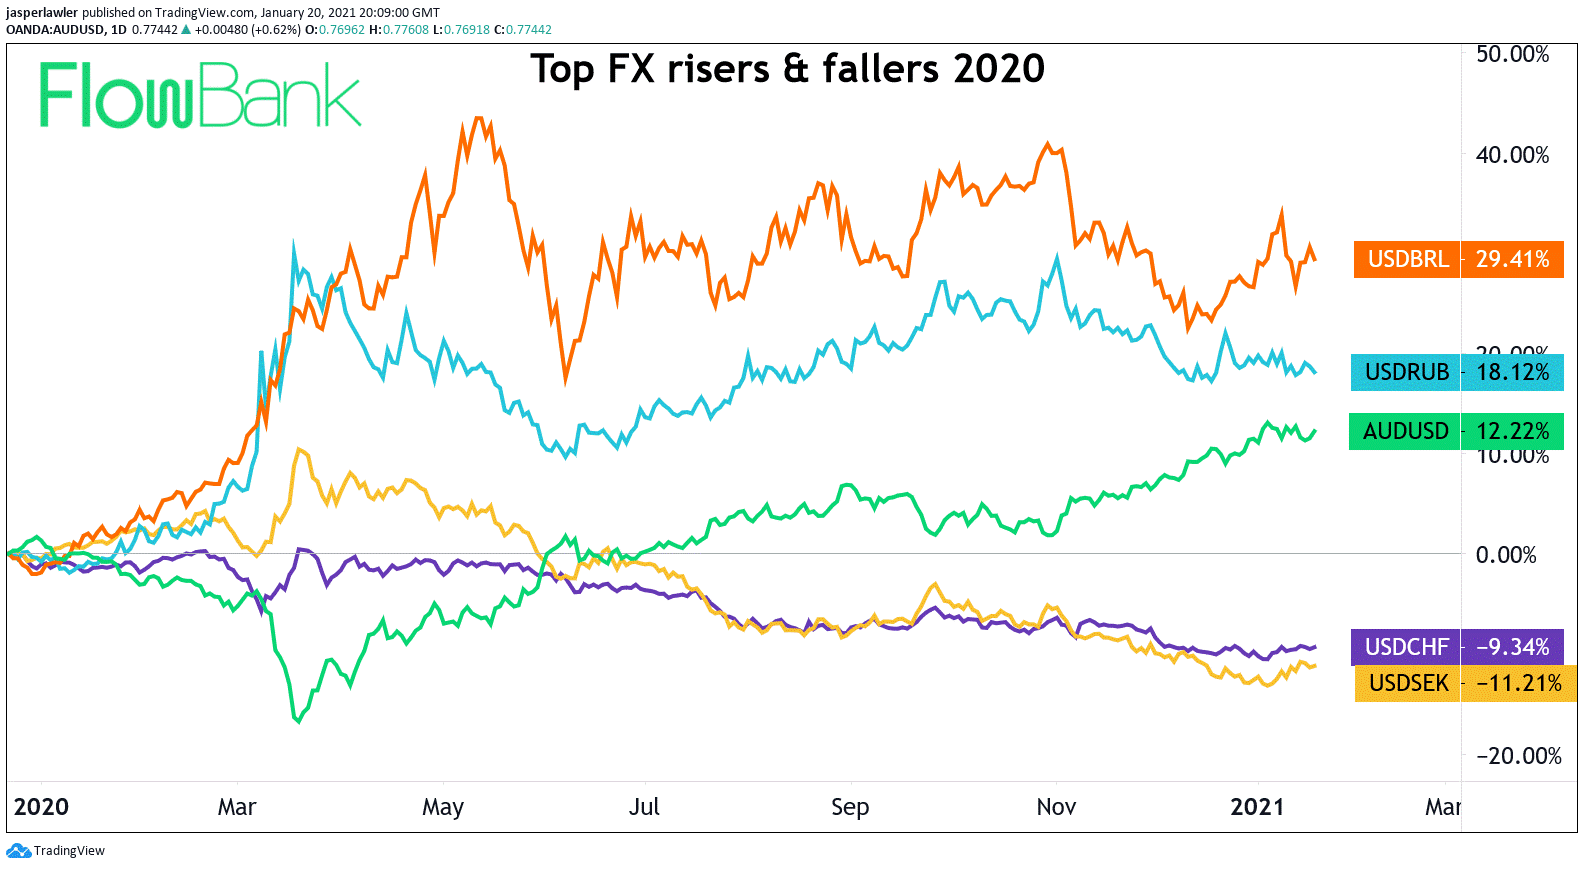 FX risers and fallers 2020